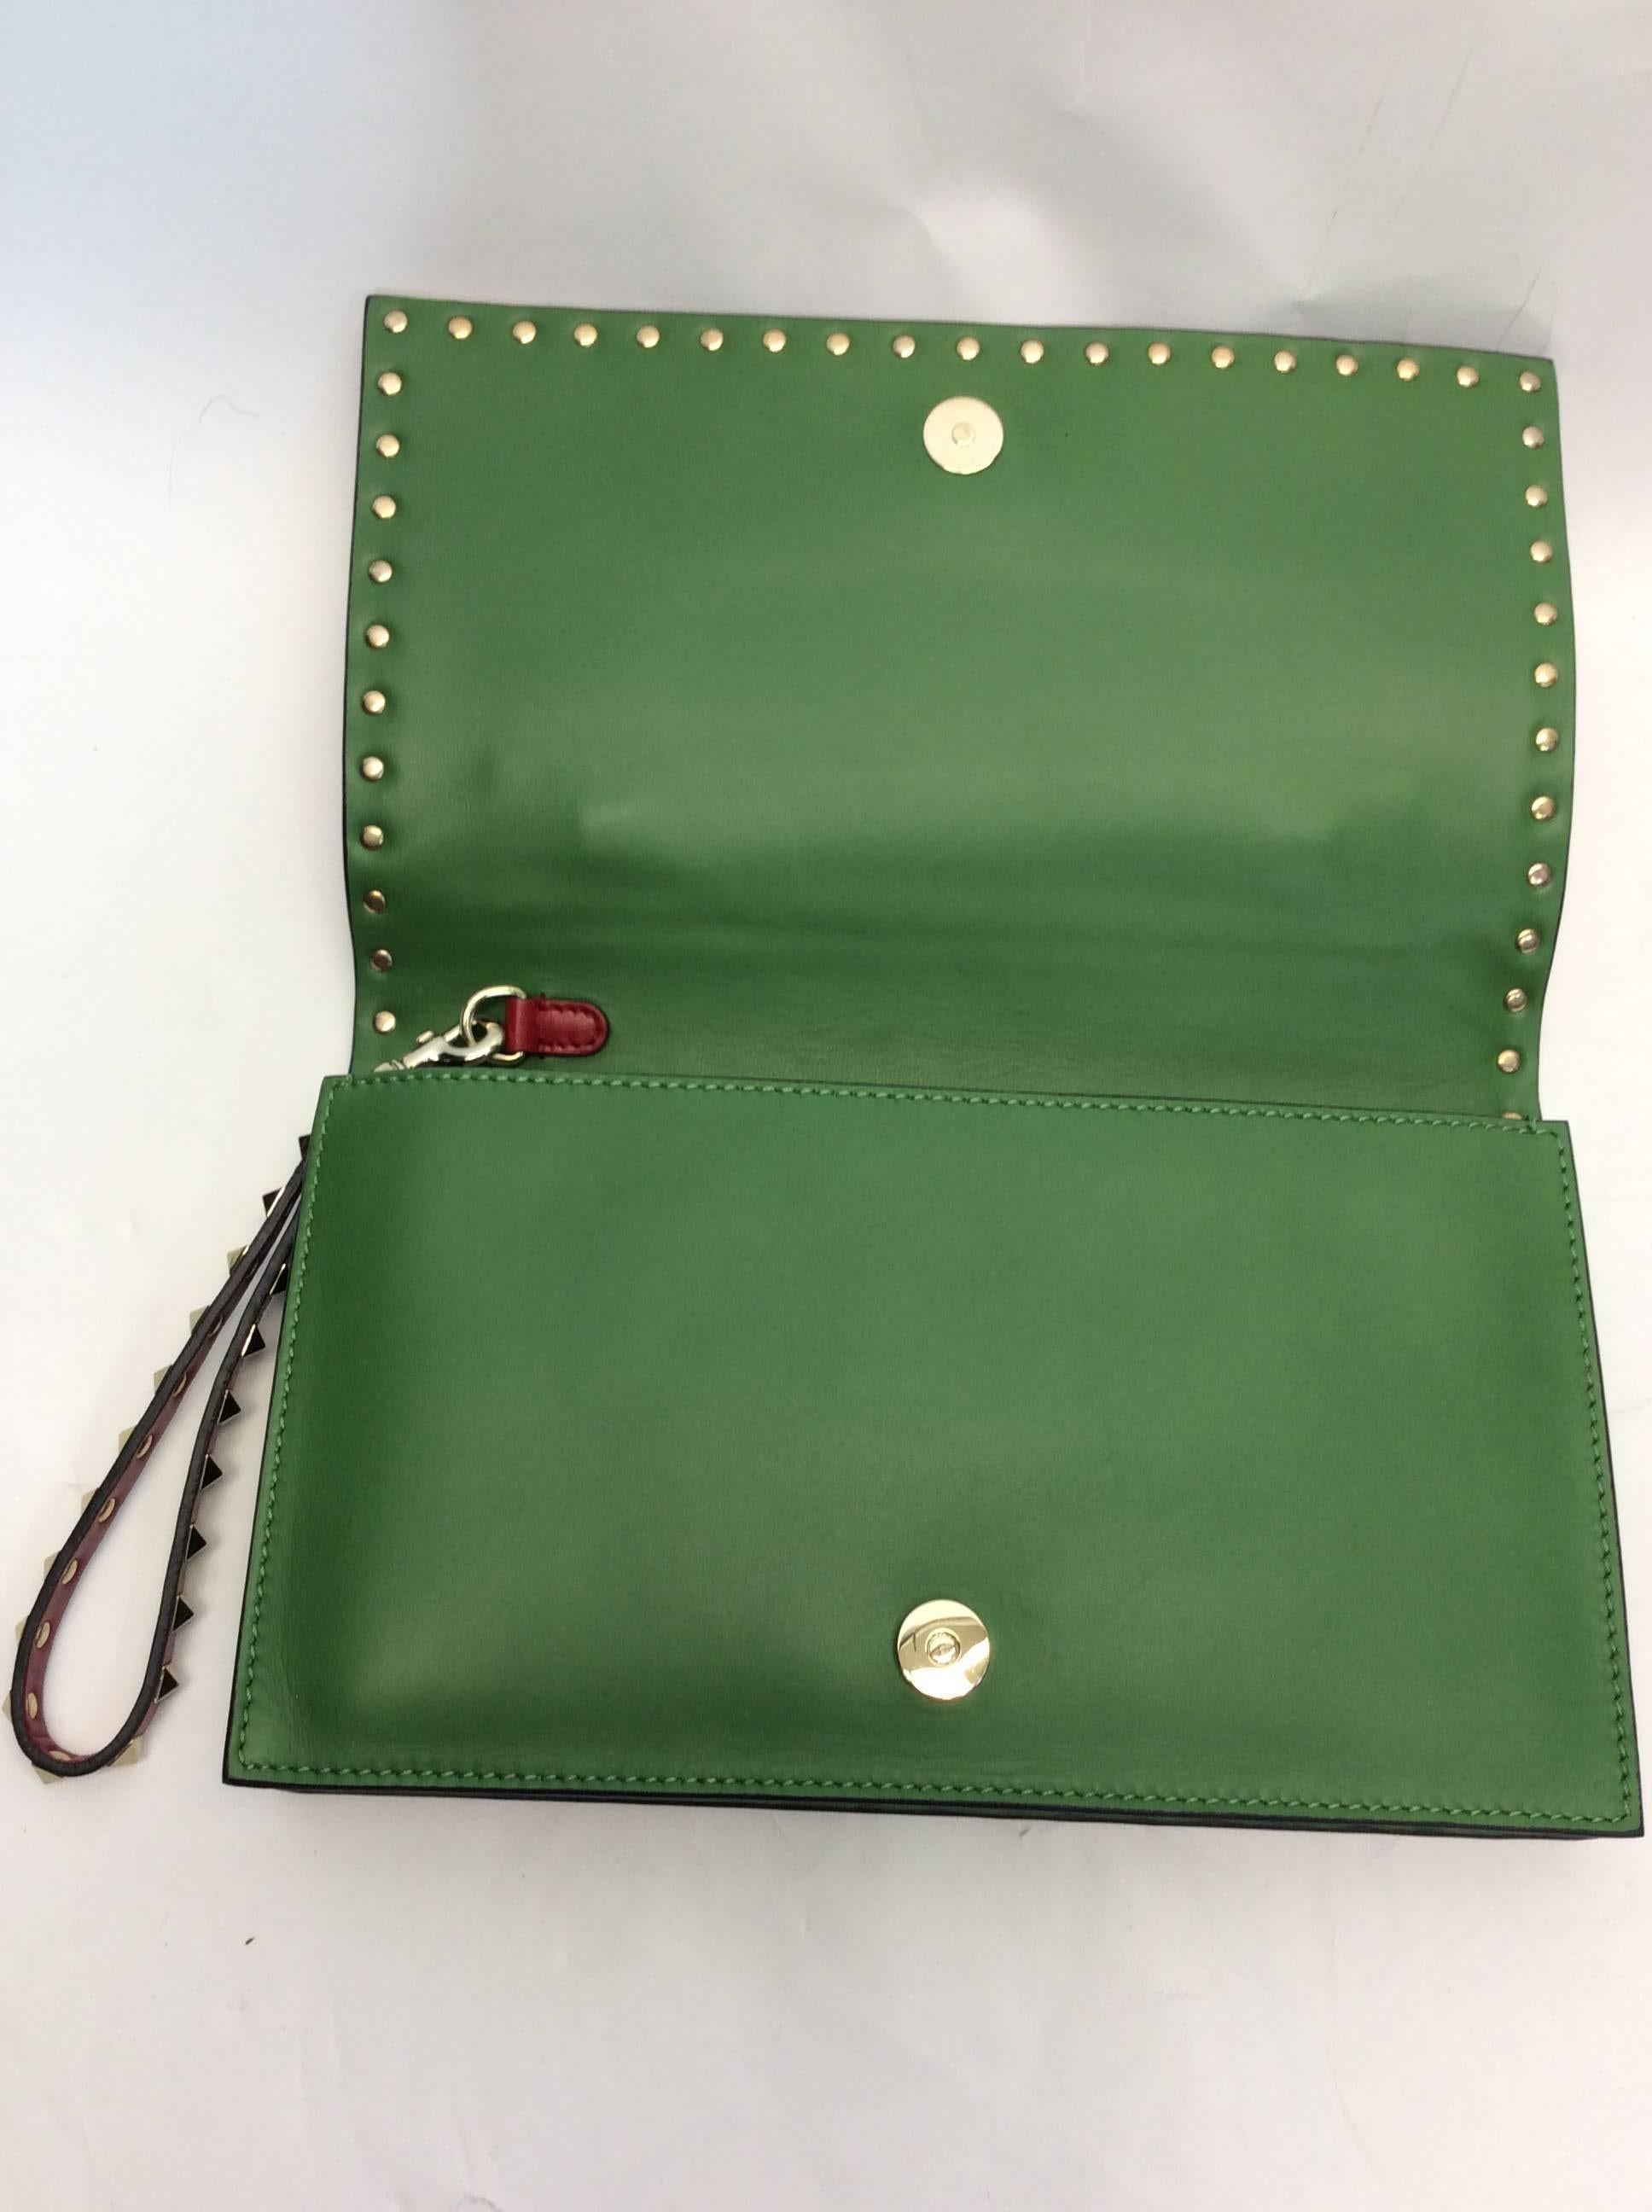 Valentino Tricolor Rockstud Flap Clutch For Sale 1